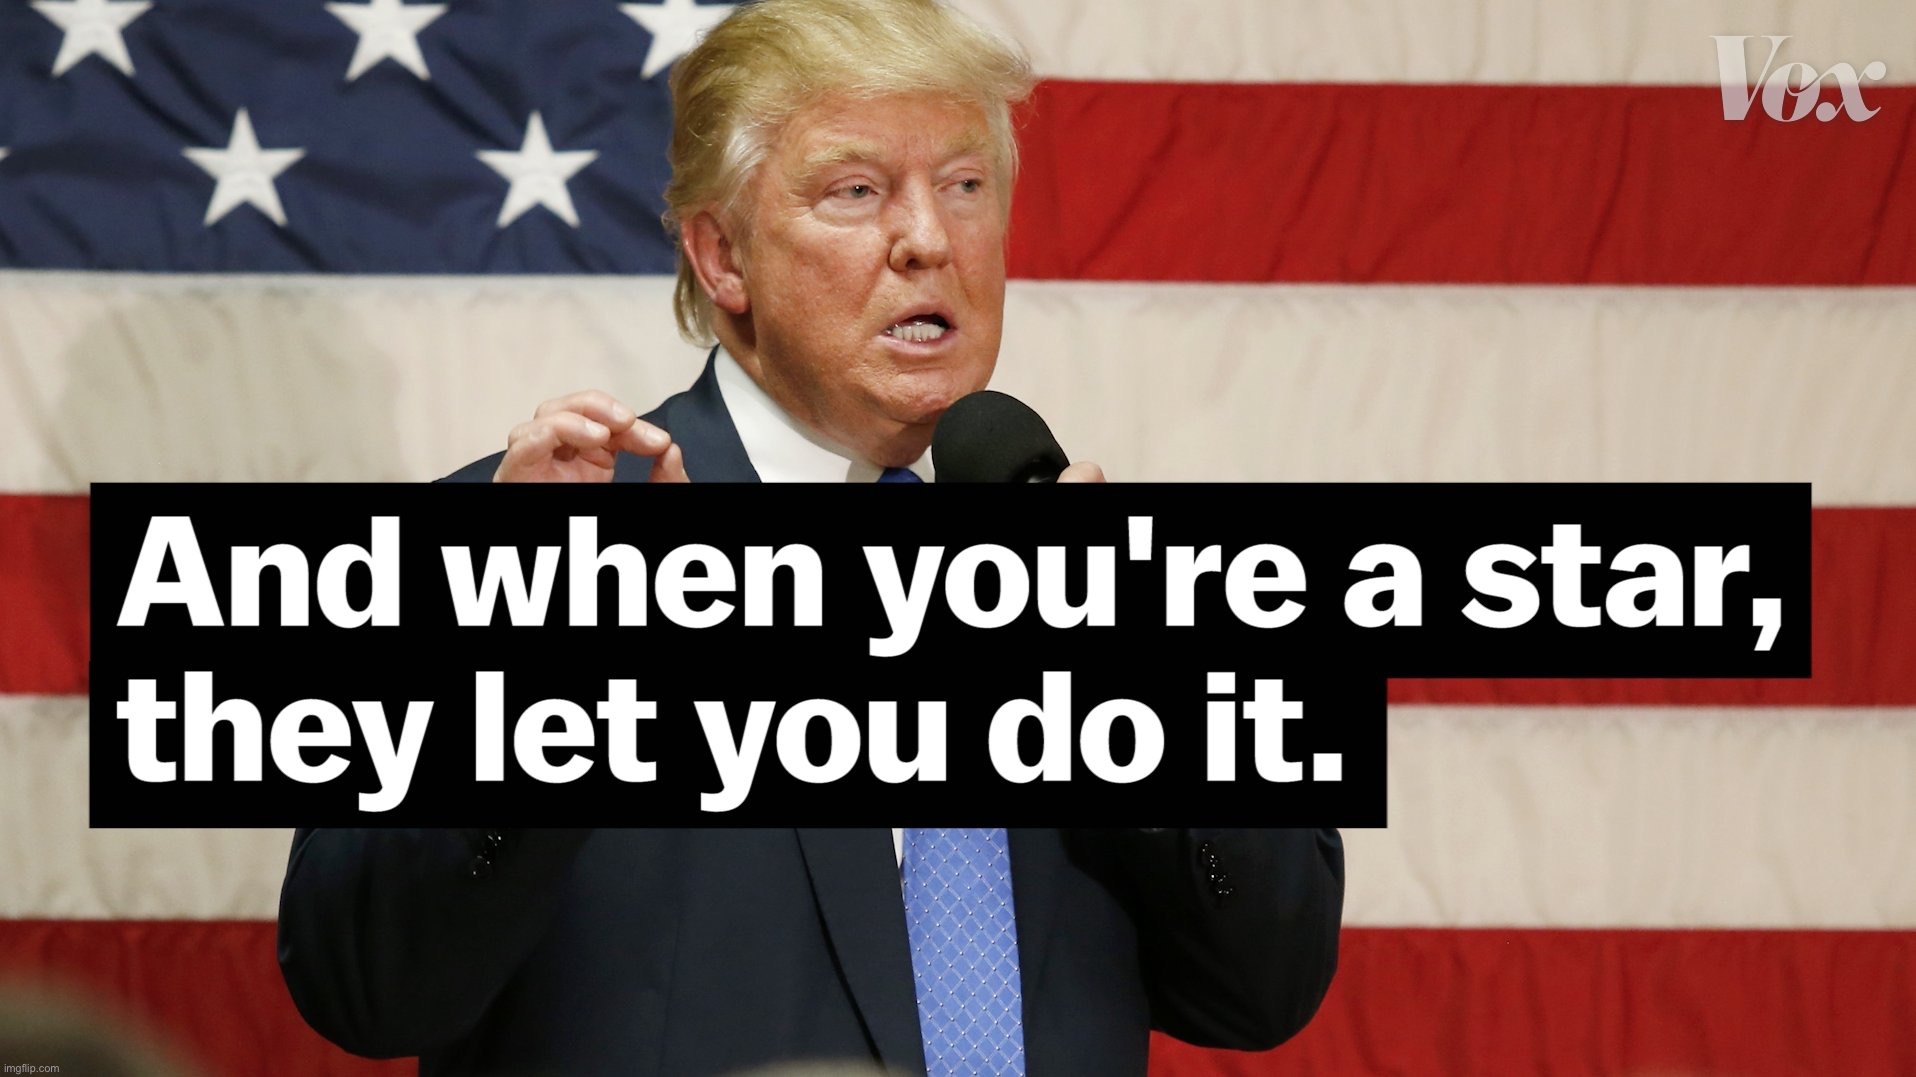 Donald Trump And when you’re a star they let you do it | image tagged in donald trump and when you re a star they let you do it | made w/ Imgflip meme maker